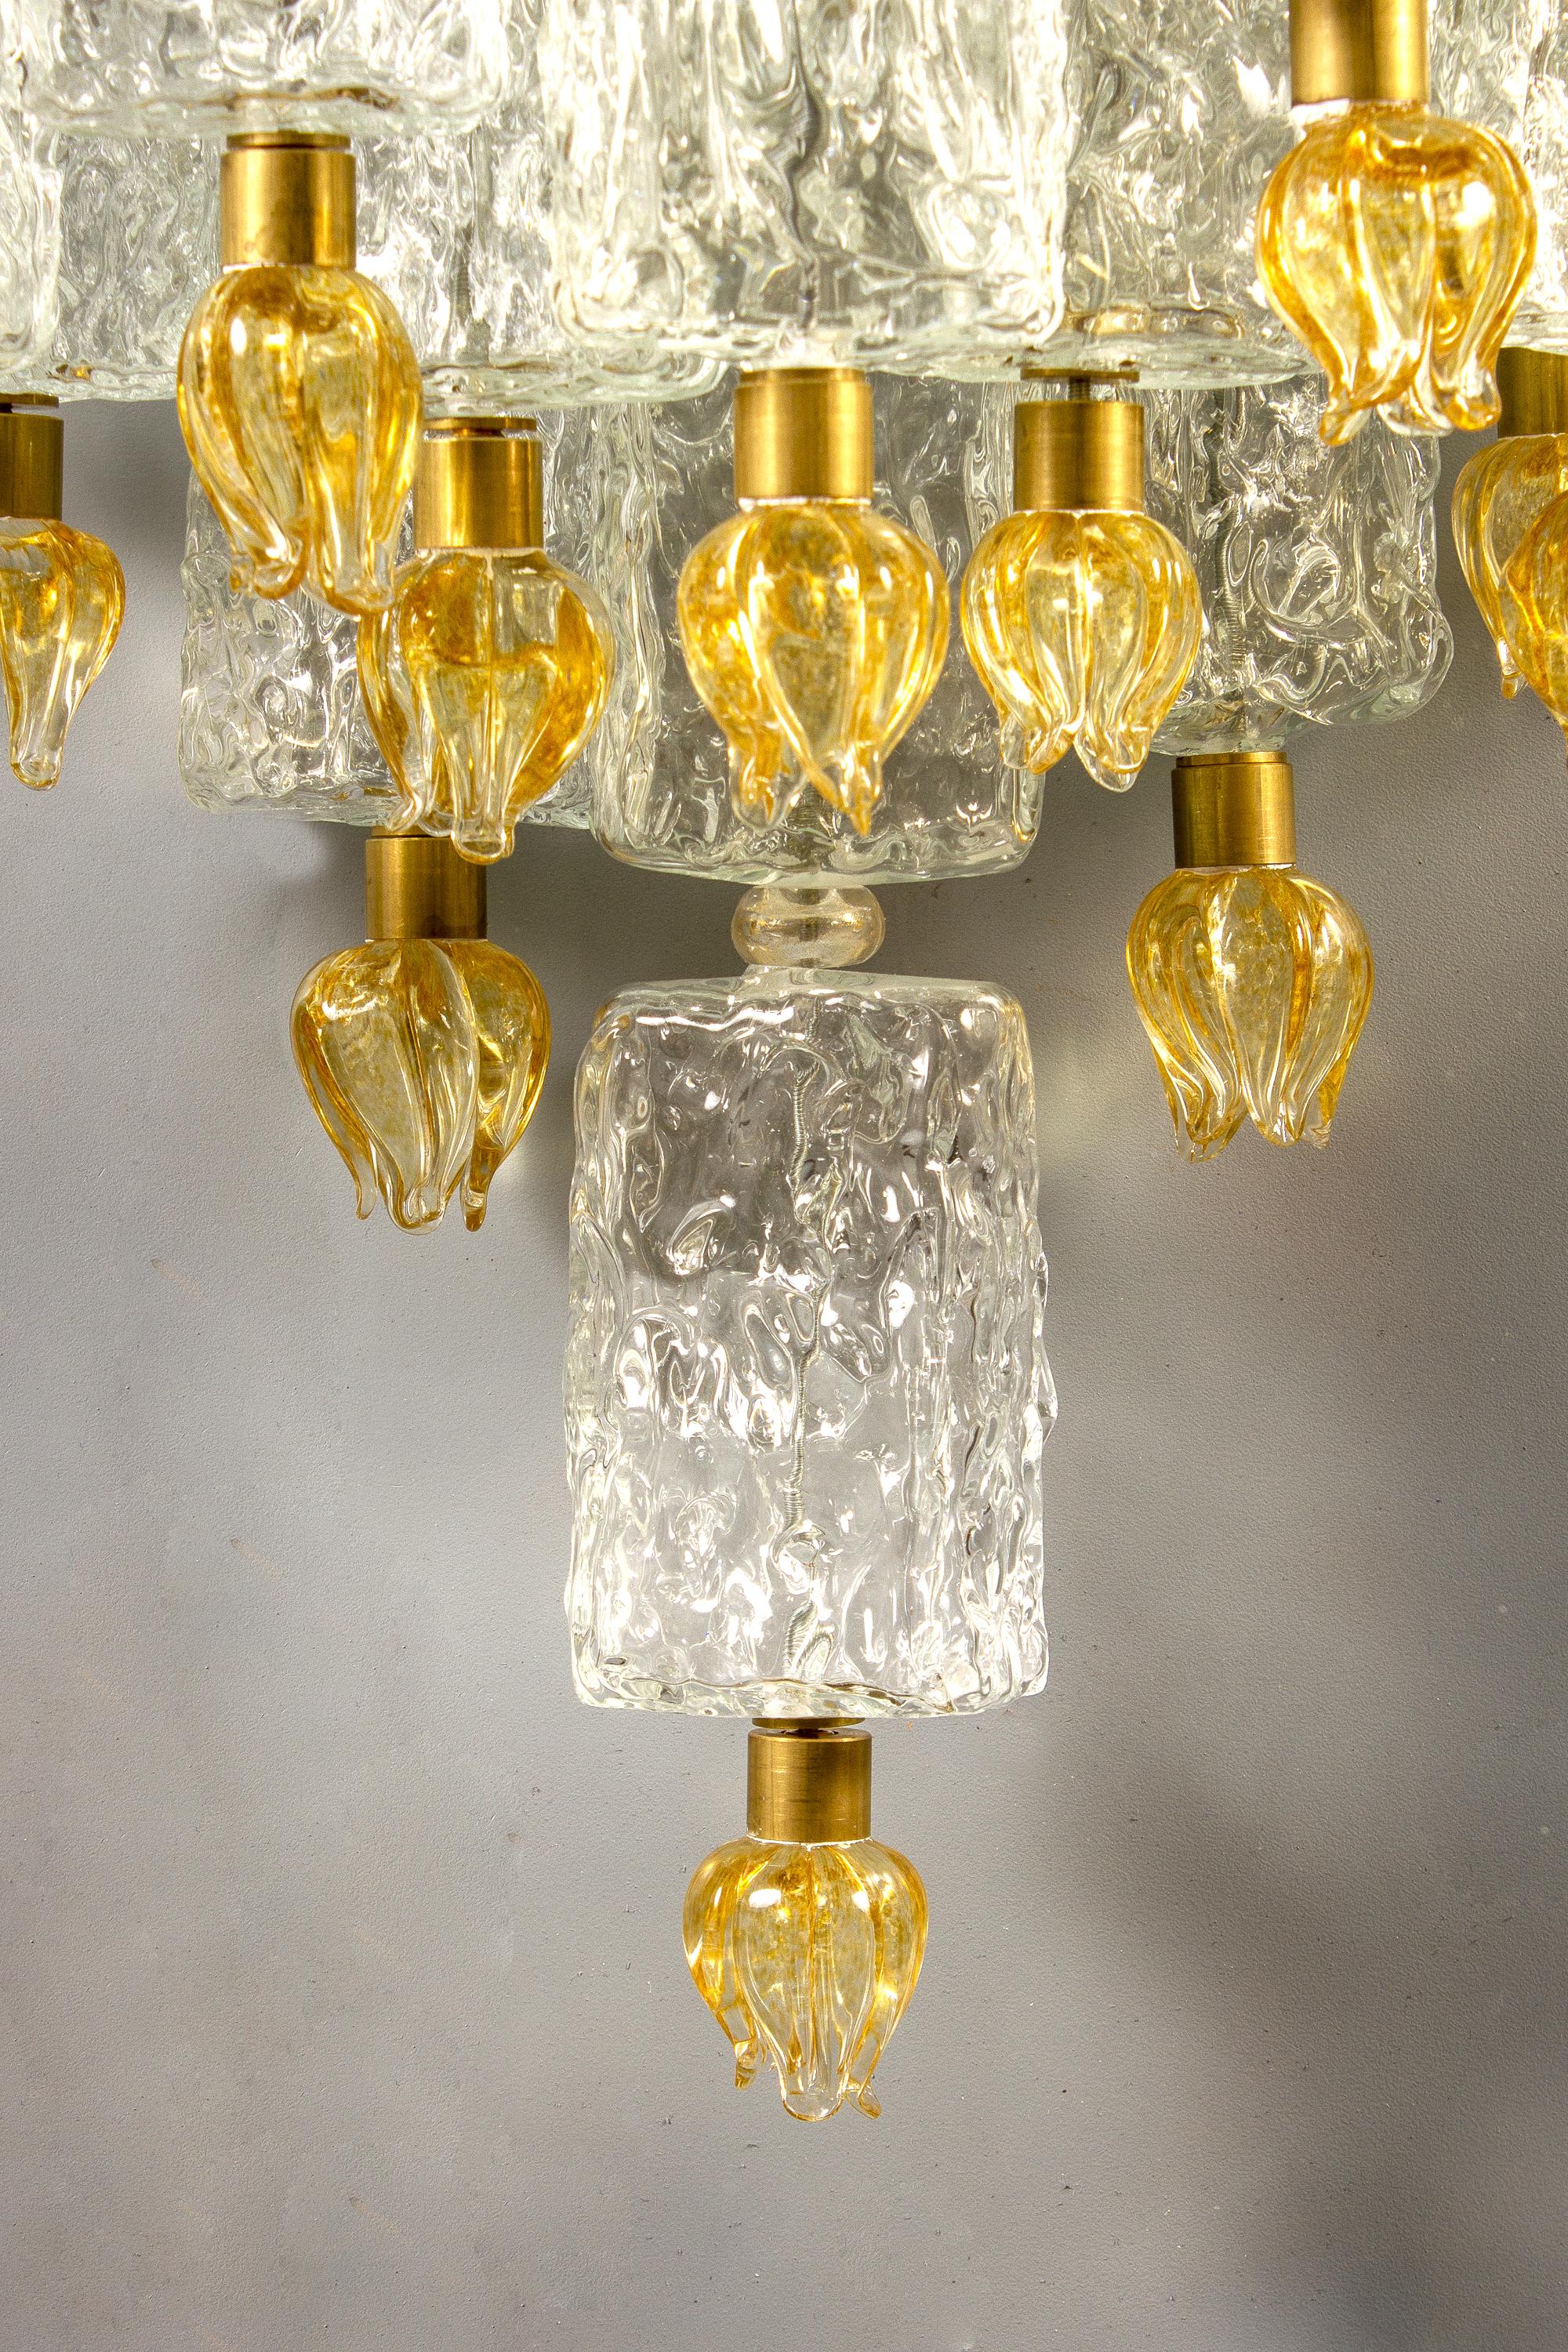 Pair of Barovier & Toso Glass Blocks with Gold Tulip Sconces, 1940 For Sale 5